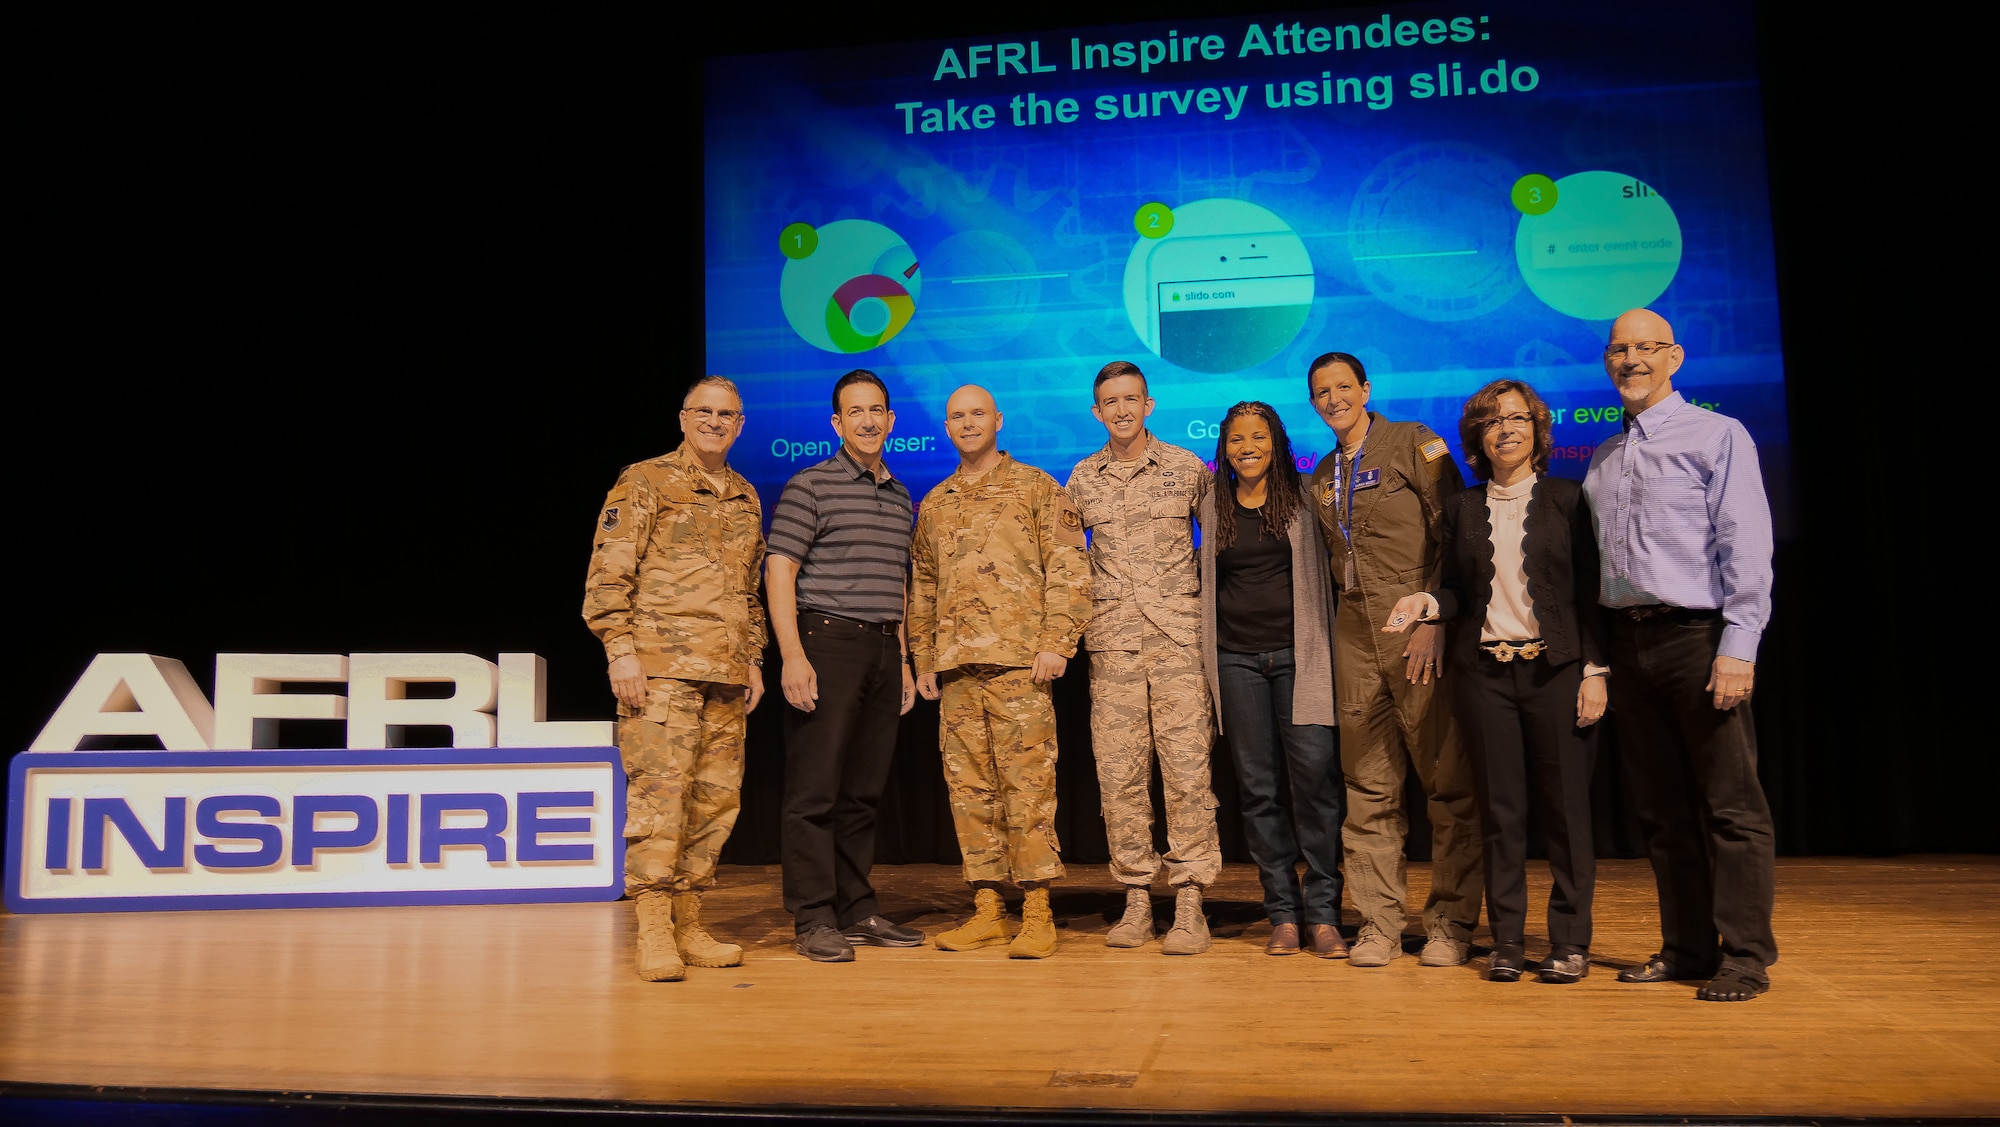 The AFRL 2019 Inspire/Tech Expo event featured seven guest speakers who showcased innovative ideas and the passionate people AFRL has to offer in short, entertaining and thought-provoking talks. Left to right: Maj. Gen. William Cooley, AFRL commander, Inspire speakers Peter Mozloom, 2nd Lt. Justin Davis, 1st Lt. Brennan Taylor, Amber Anderson, Capt. Sarah Woody, Dr. Ivett Leyva, and Dr. Dan Miracle. (U.S. Air Force photo/Keith Lewis)